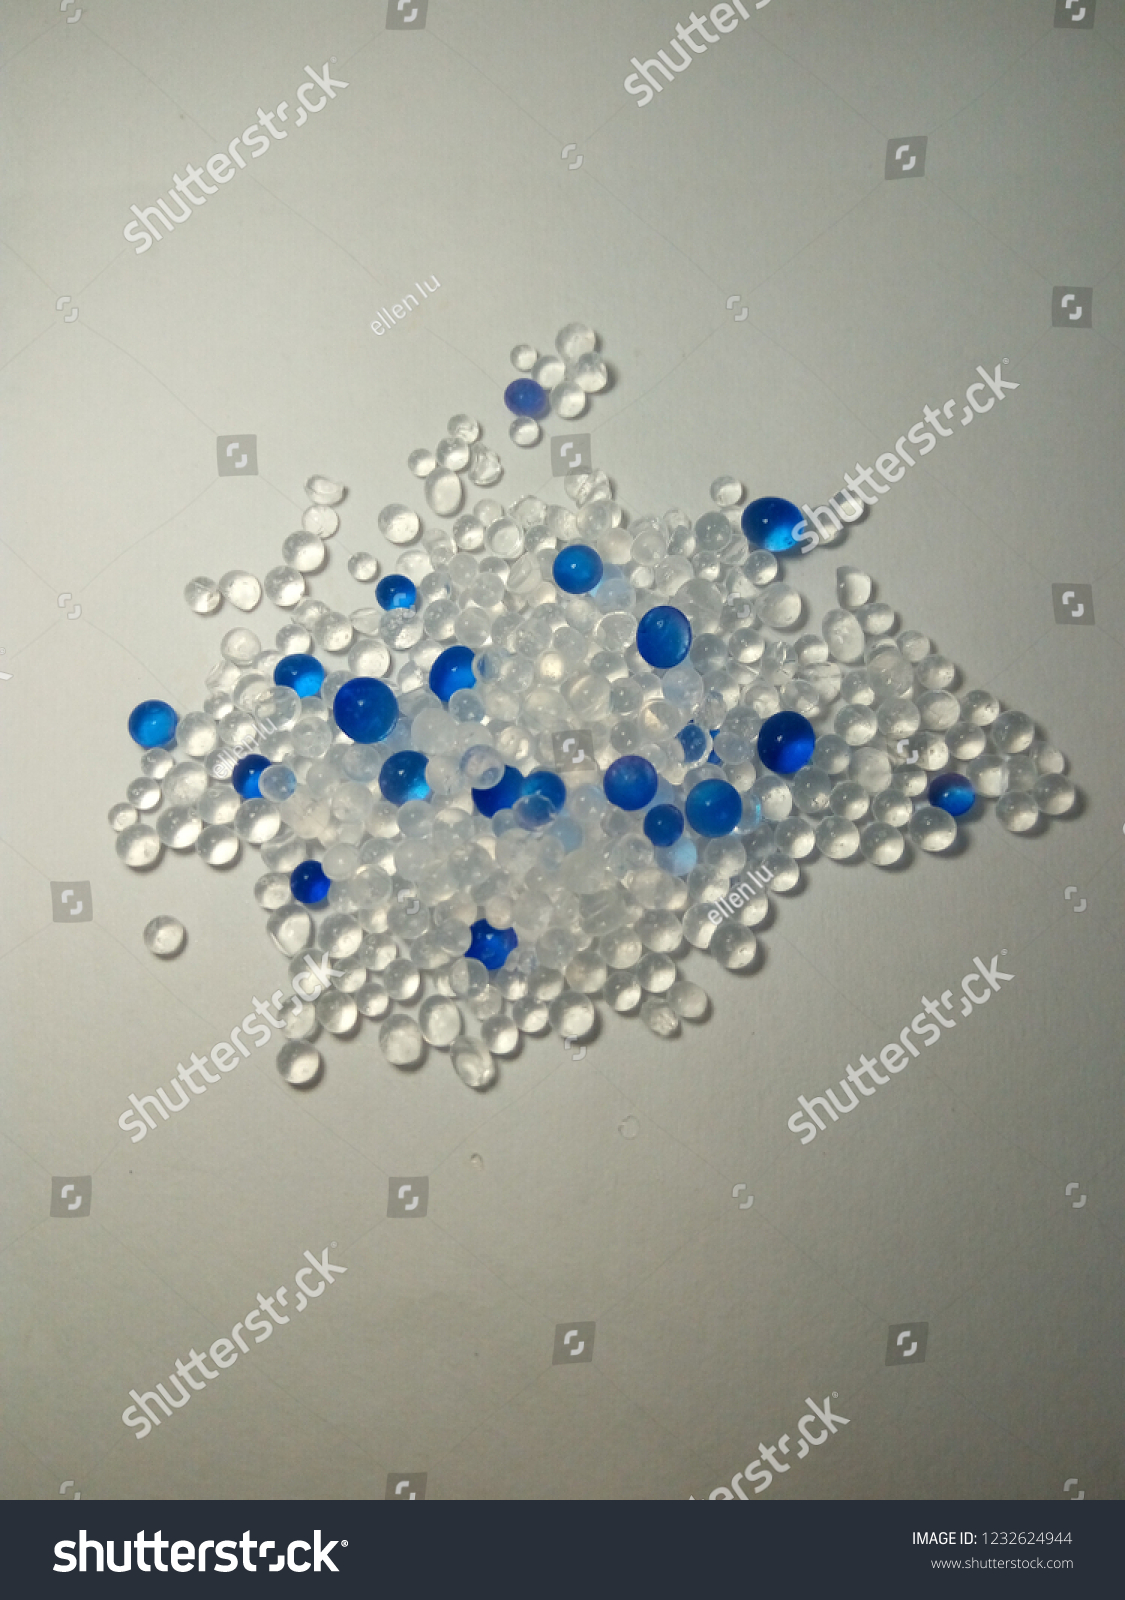 Blue and  white  silica gel desiccant abstract background #1232624944